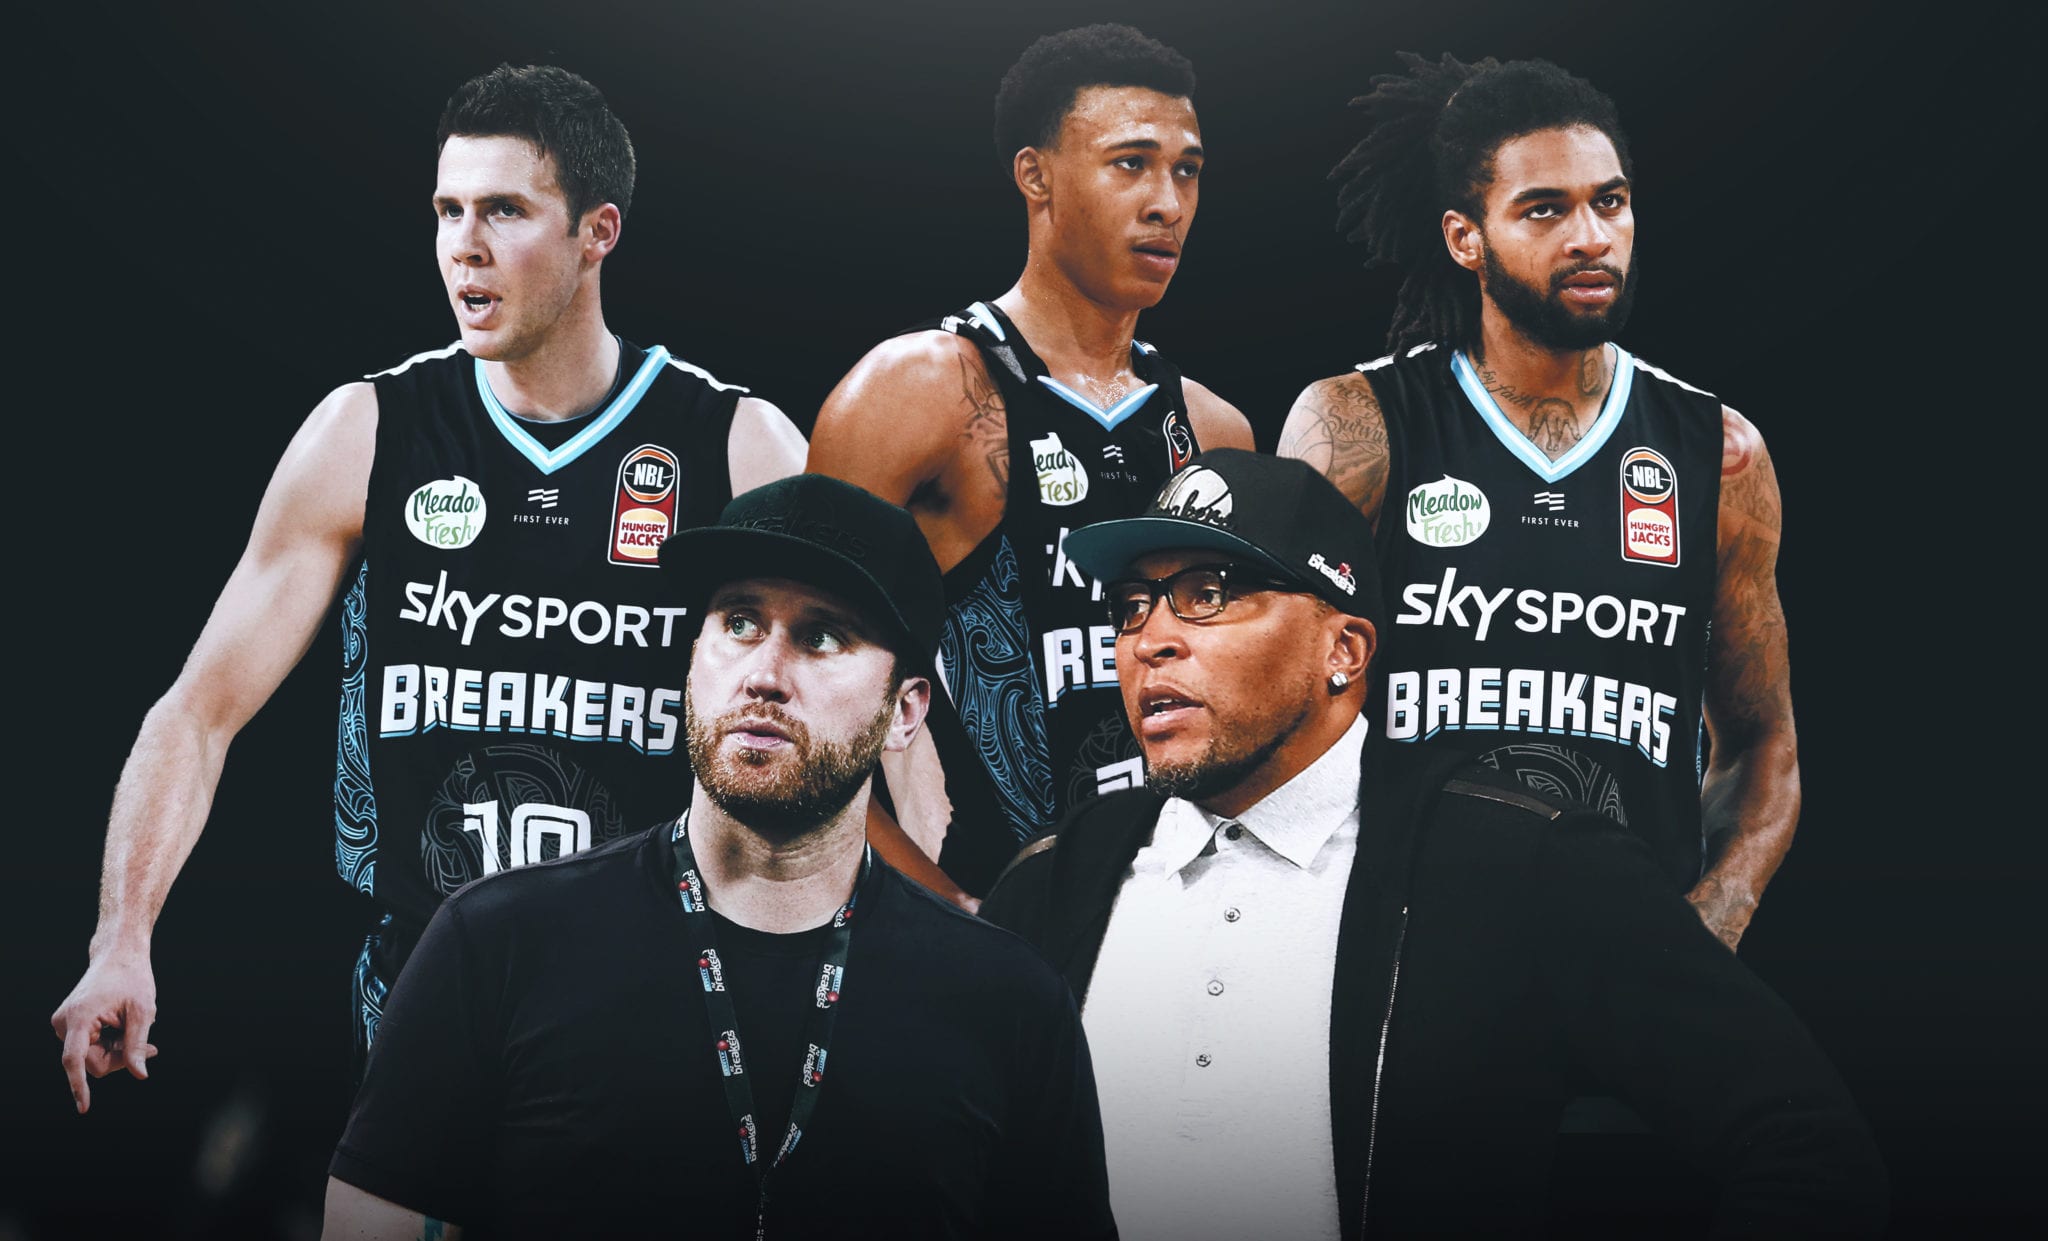 The New Zealand Breakers Have Descended 